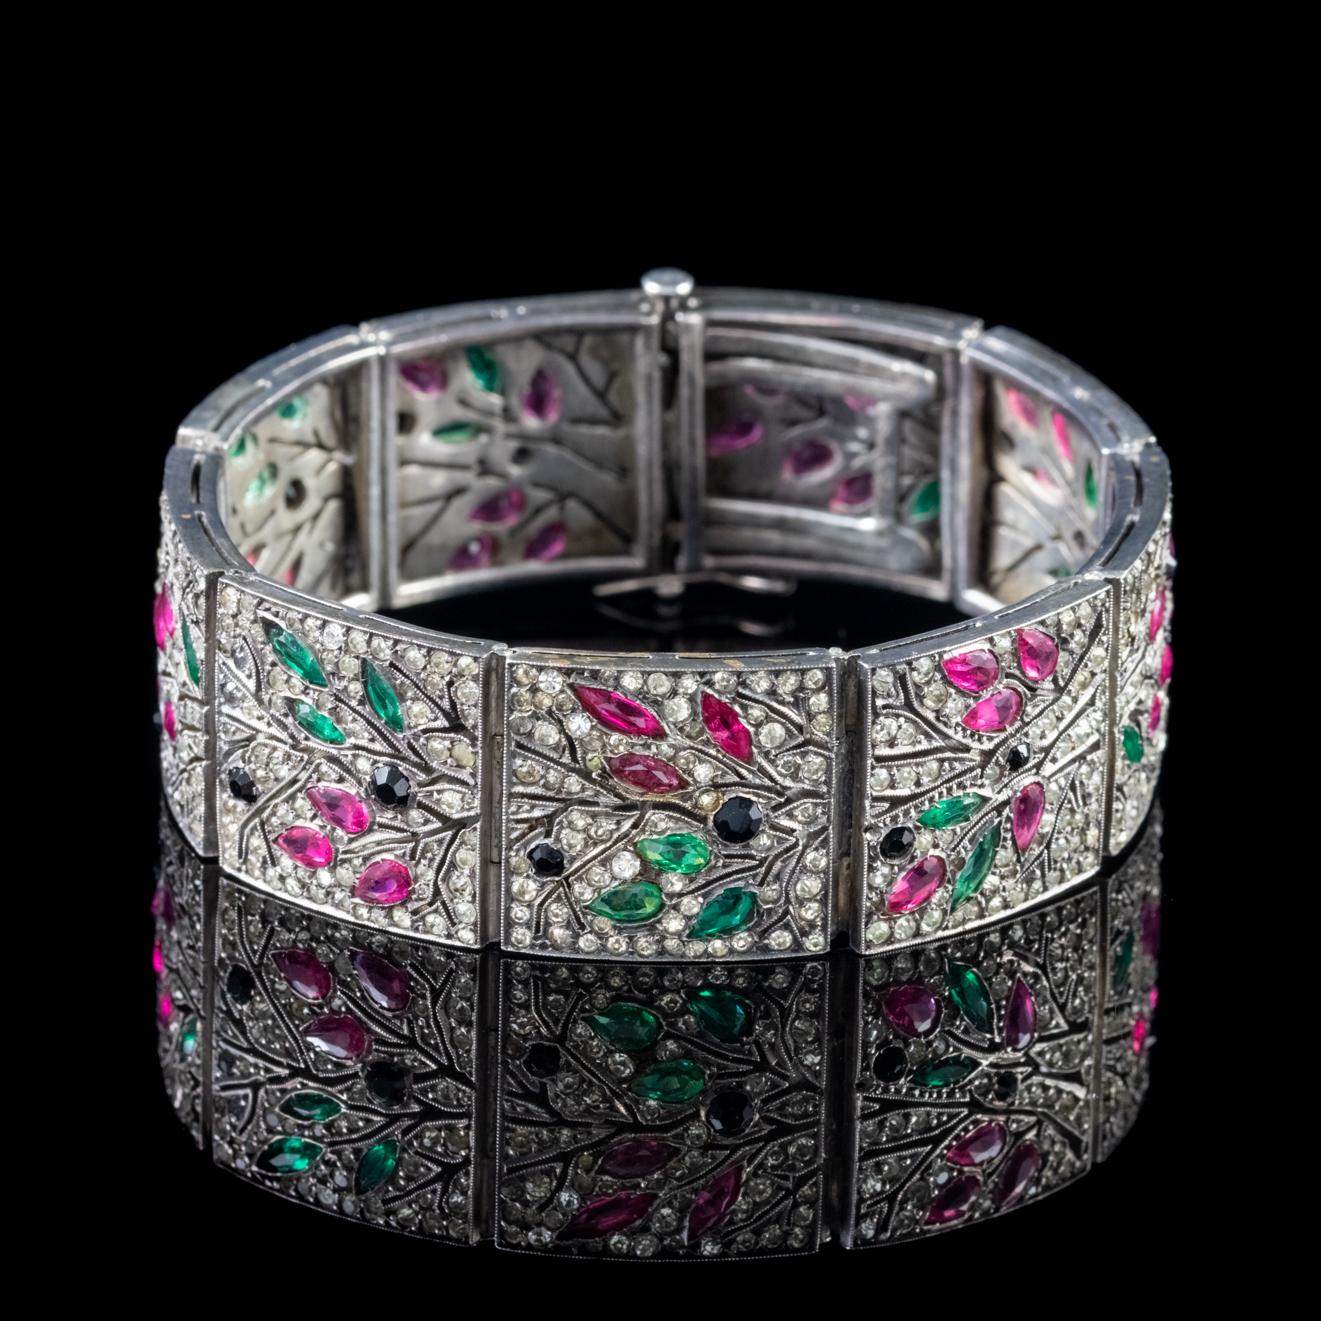 An exquisite French bracelet made during the Art Deco period, Circa 1920. The piece is modelled in Sterling Silver and decorated with sparkling white Paste Stones. 

Paste is a transparent flint glass that simulates the fire and brilliance of